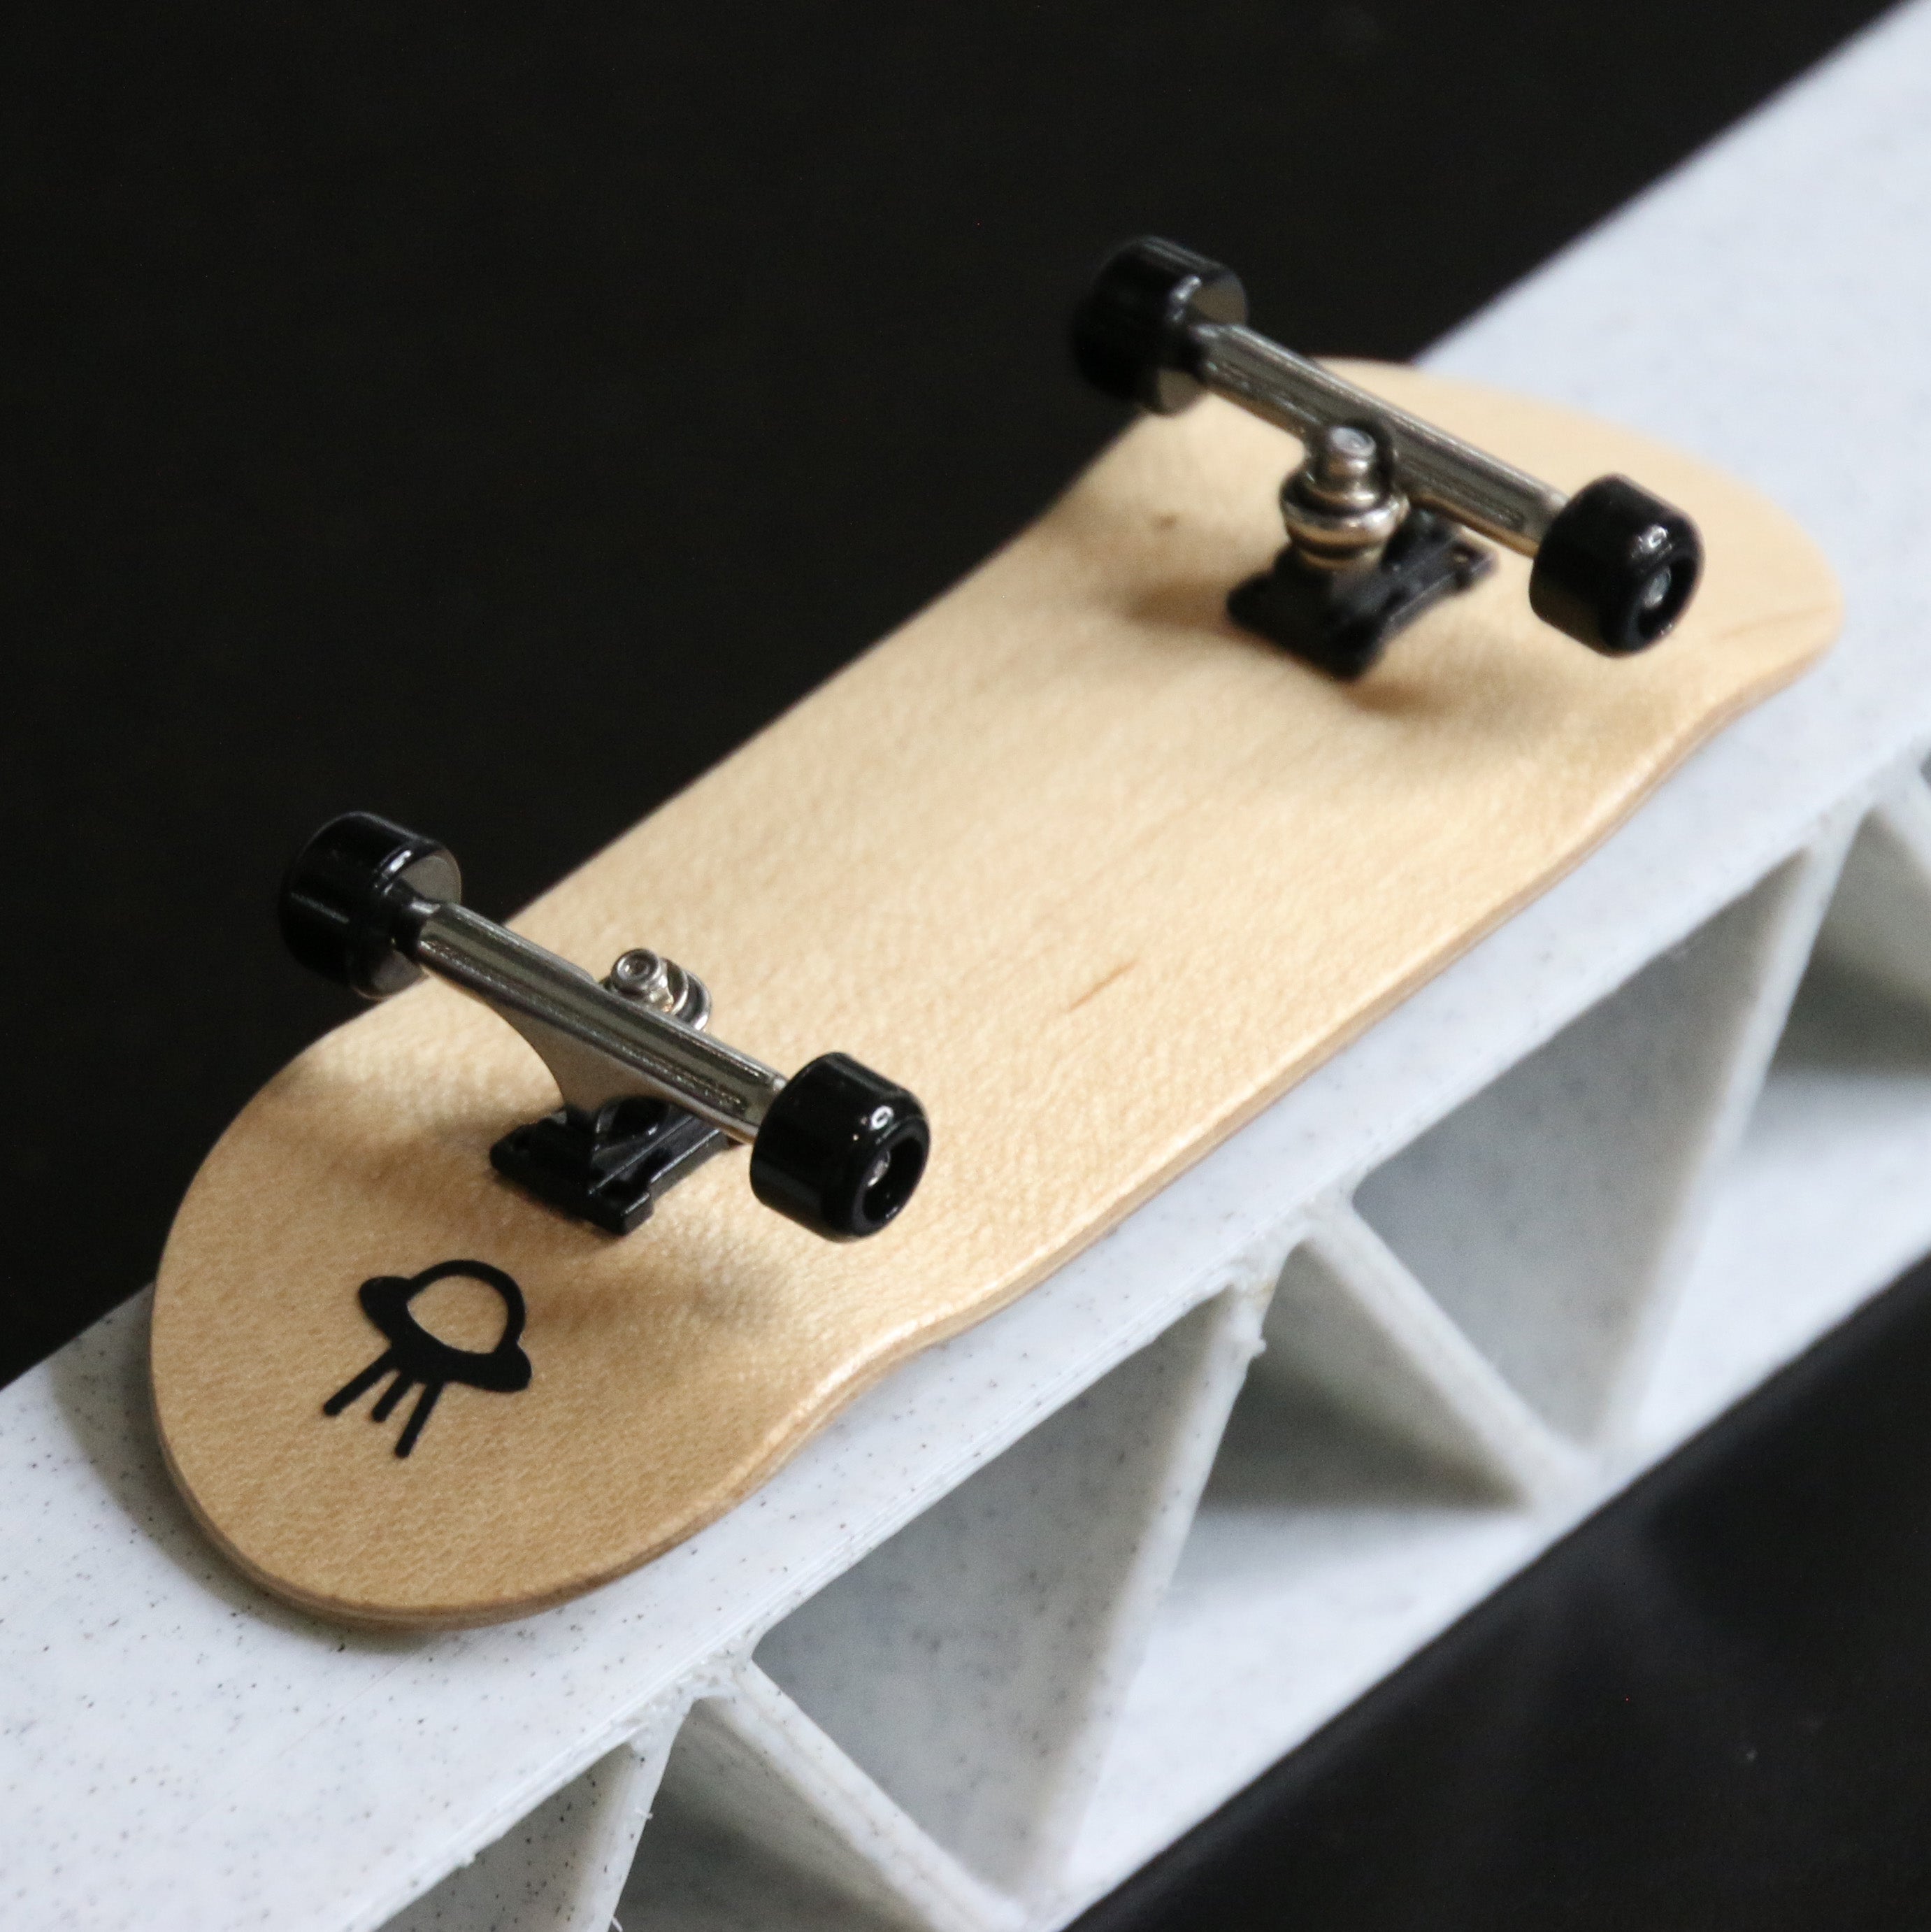 "Onyx Fragments" Eco Series Complete Fingerboard Setup